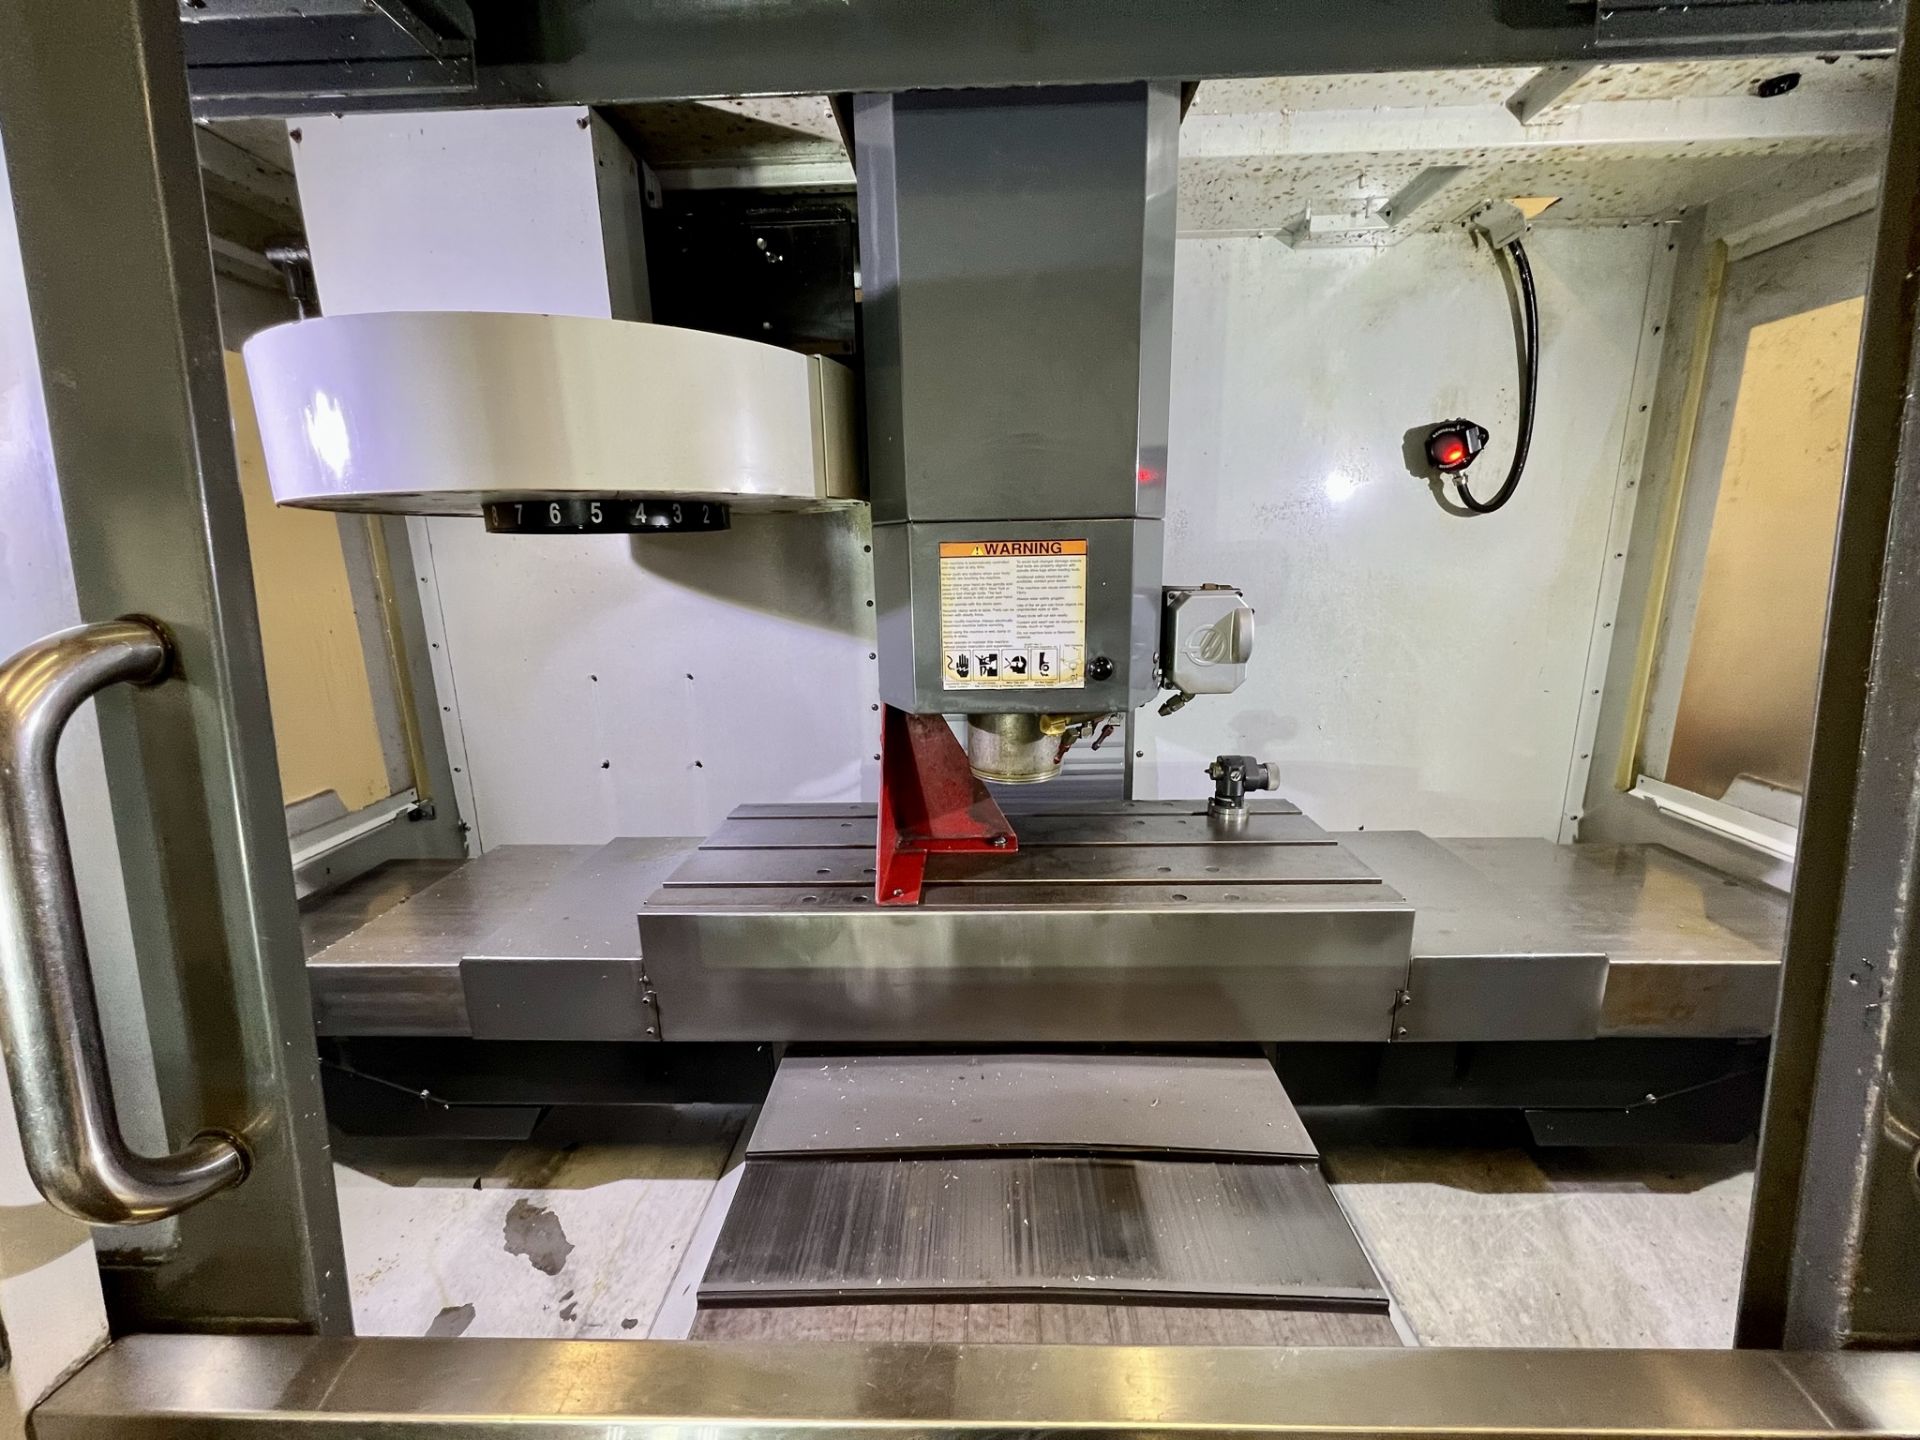 2015 HAAS VF-2 VERTICAL MACHINING CENTER, XYZ TRAVELS: 30" X 16" X 20", 36" X 14" TABLE, PROBING - Image 12 of 24